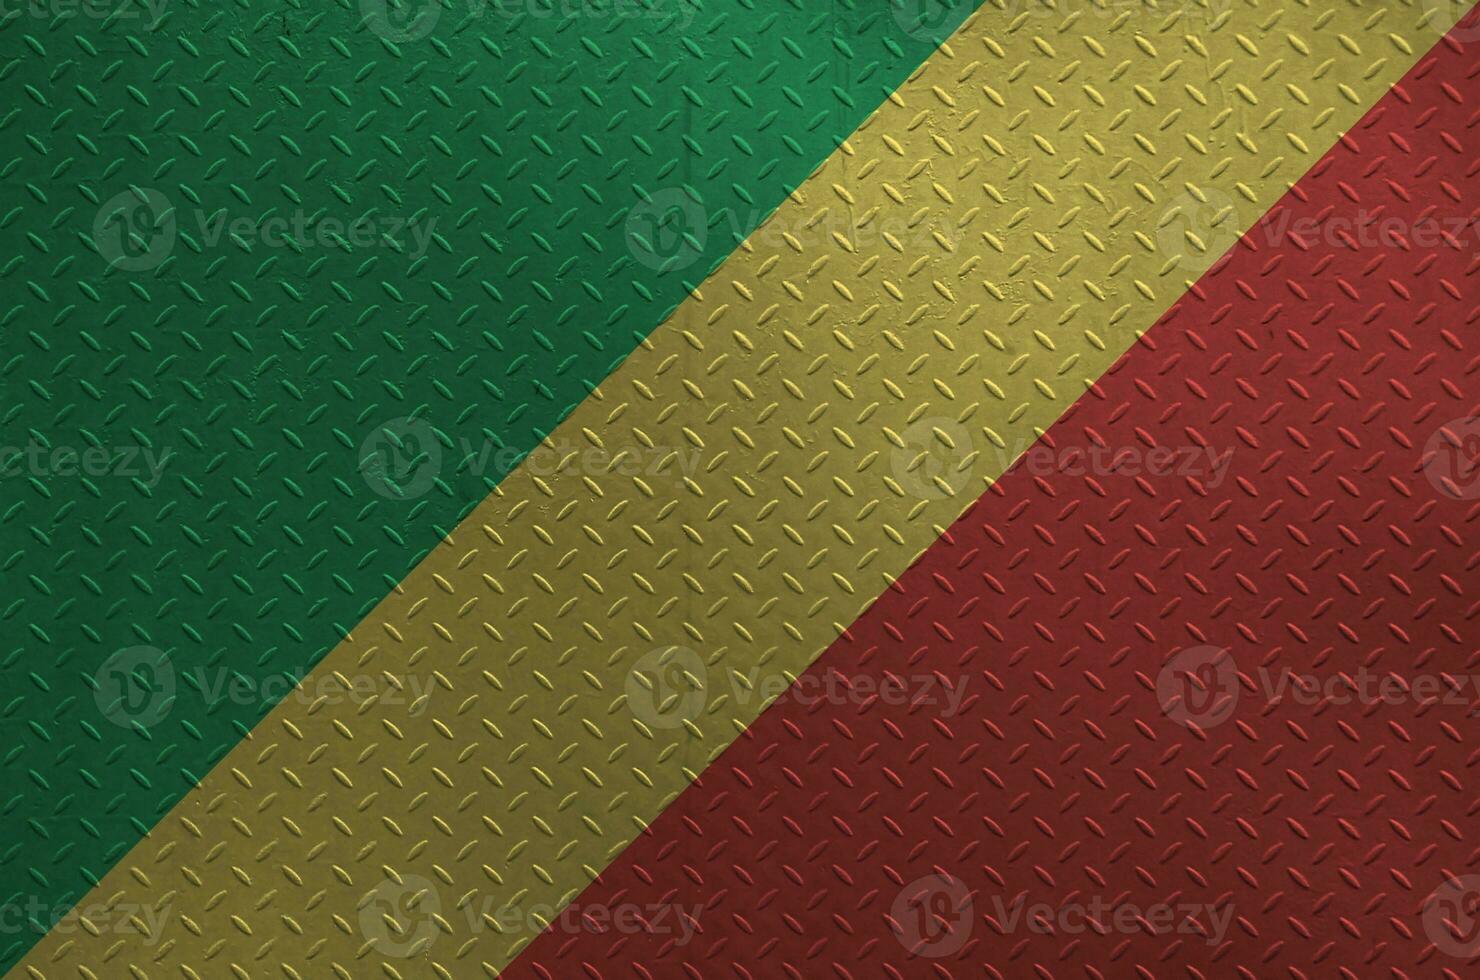 Congo flag depicted in paint colors on old brushed metal plate or wall closeup. Textured banner on rough background photo